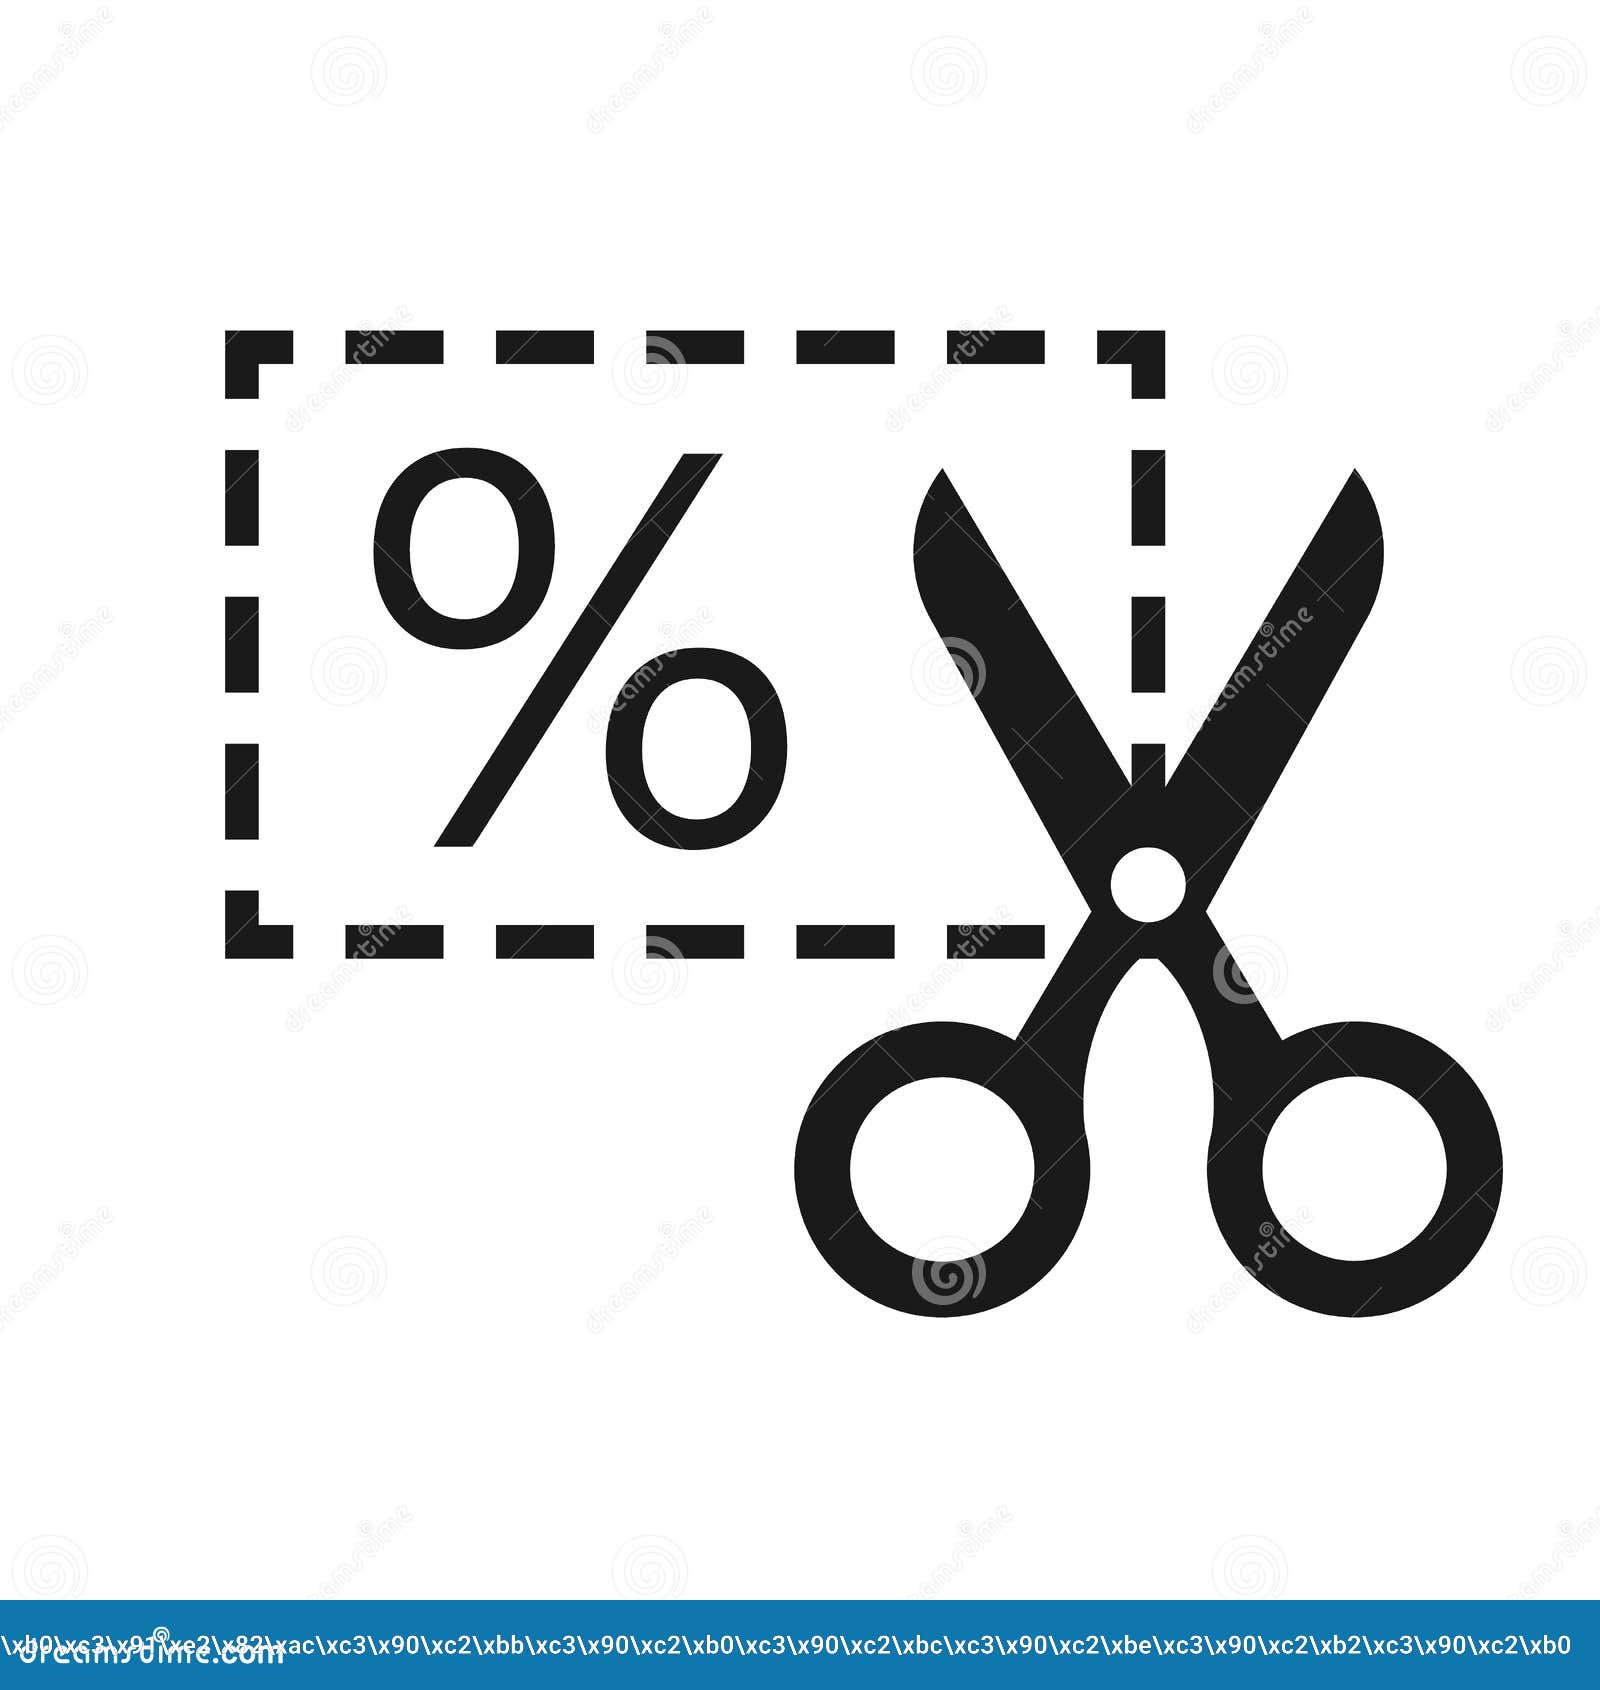 Scissors With-cut Lines Icon. Badge Place Of Cutting. Vector